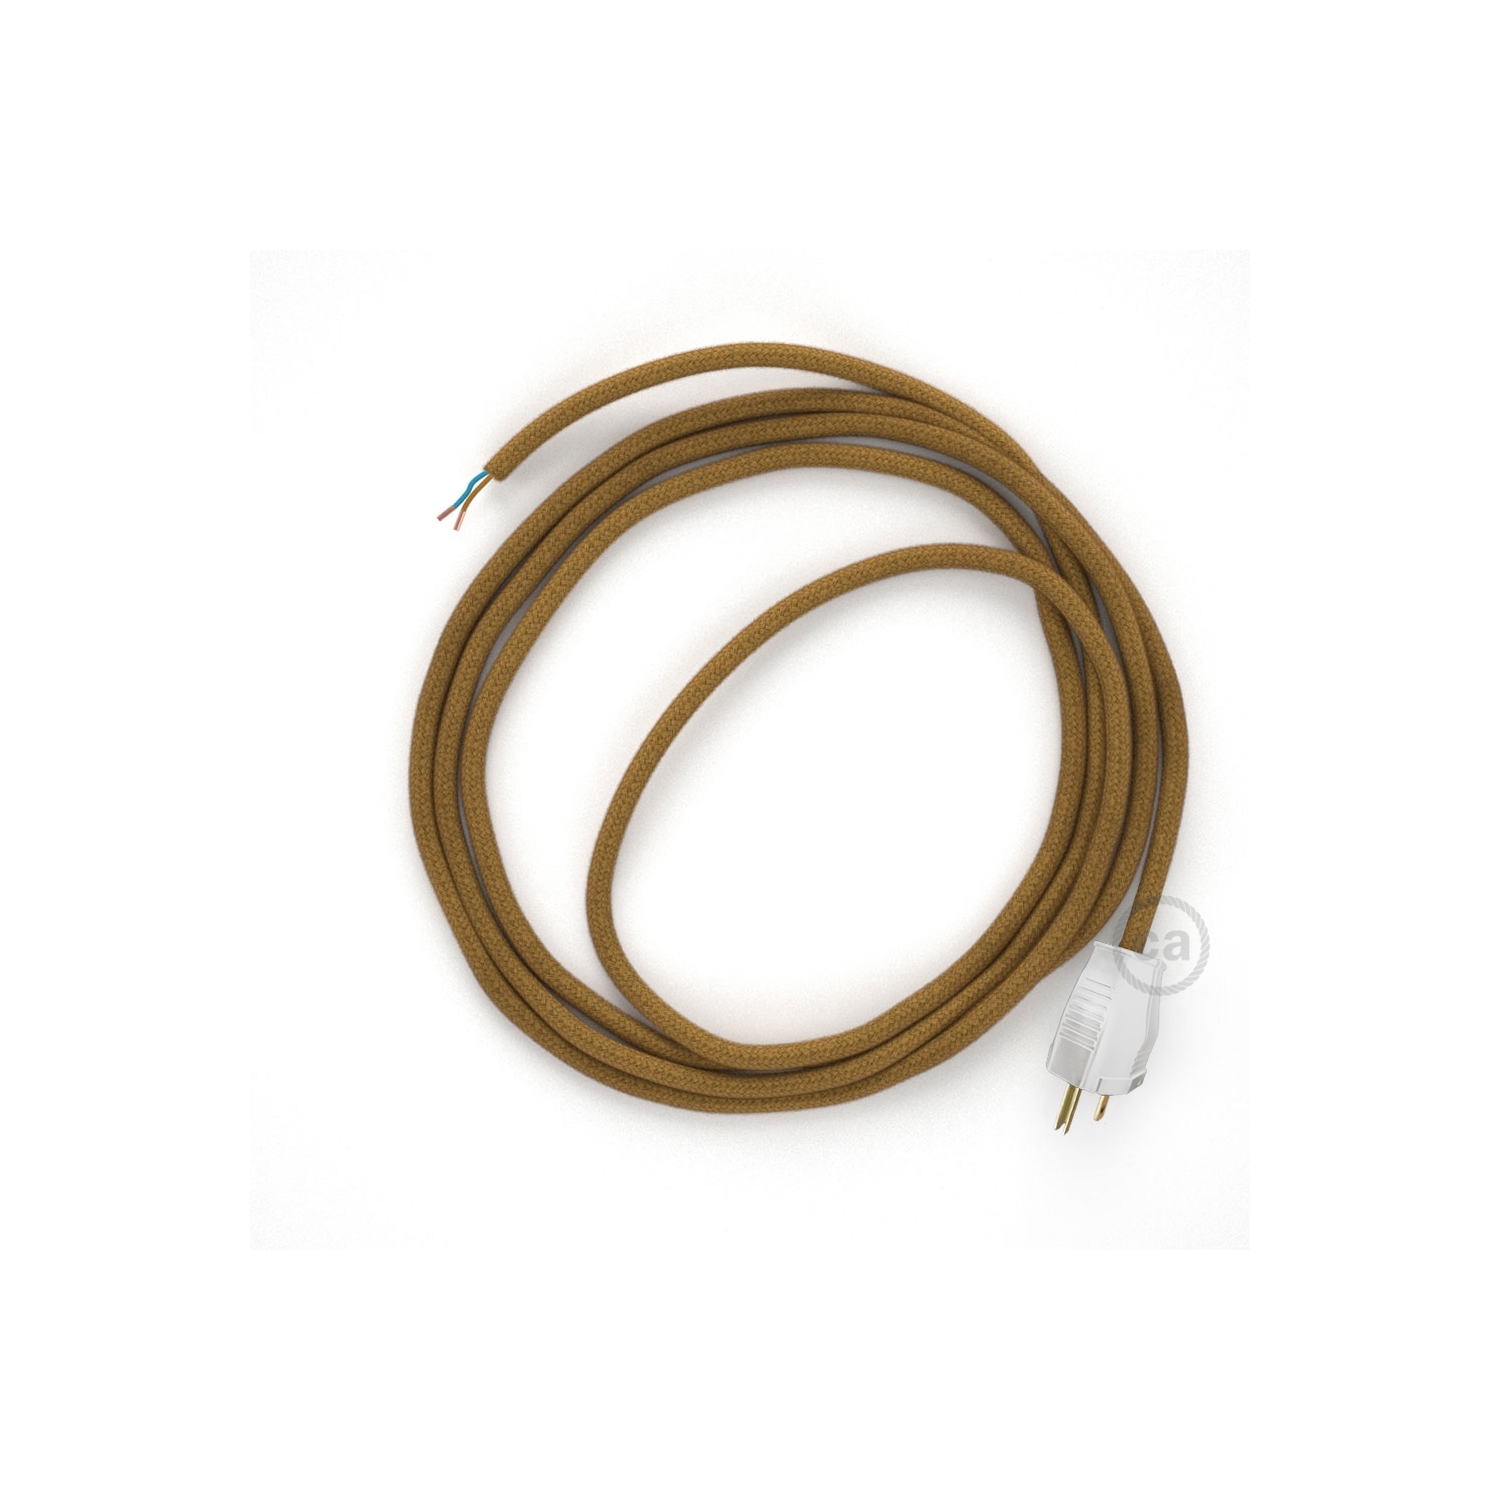 Cord-set - RC31 Mustard Cotton Covered Round Cable